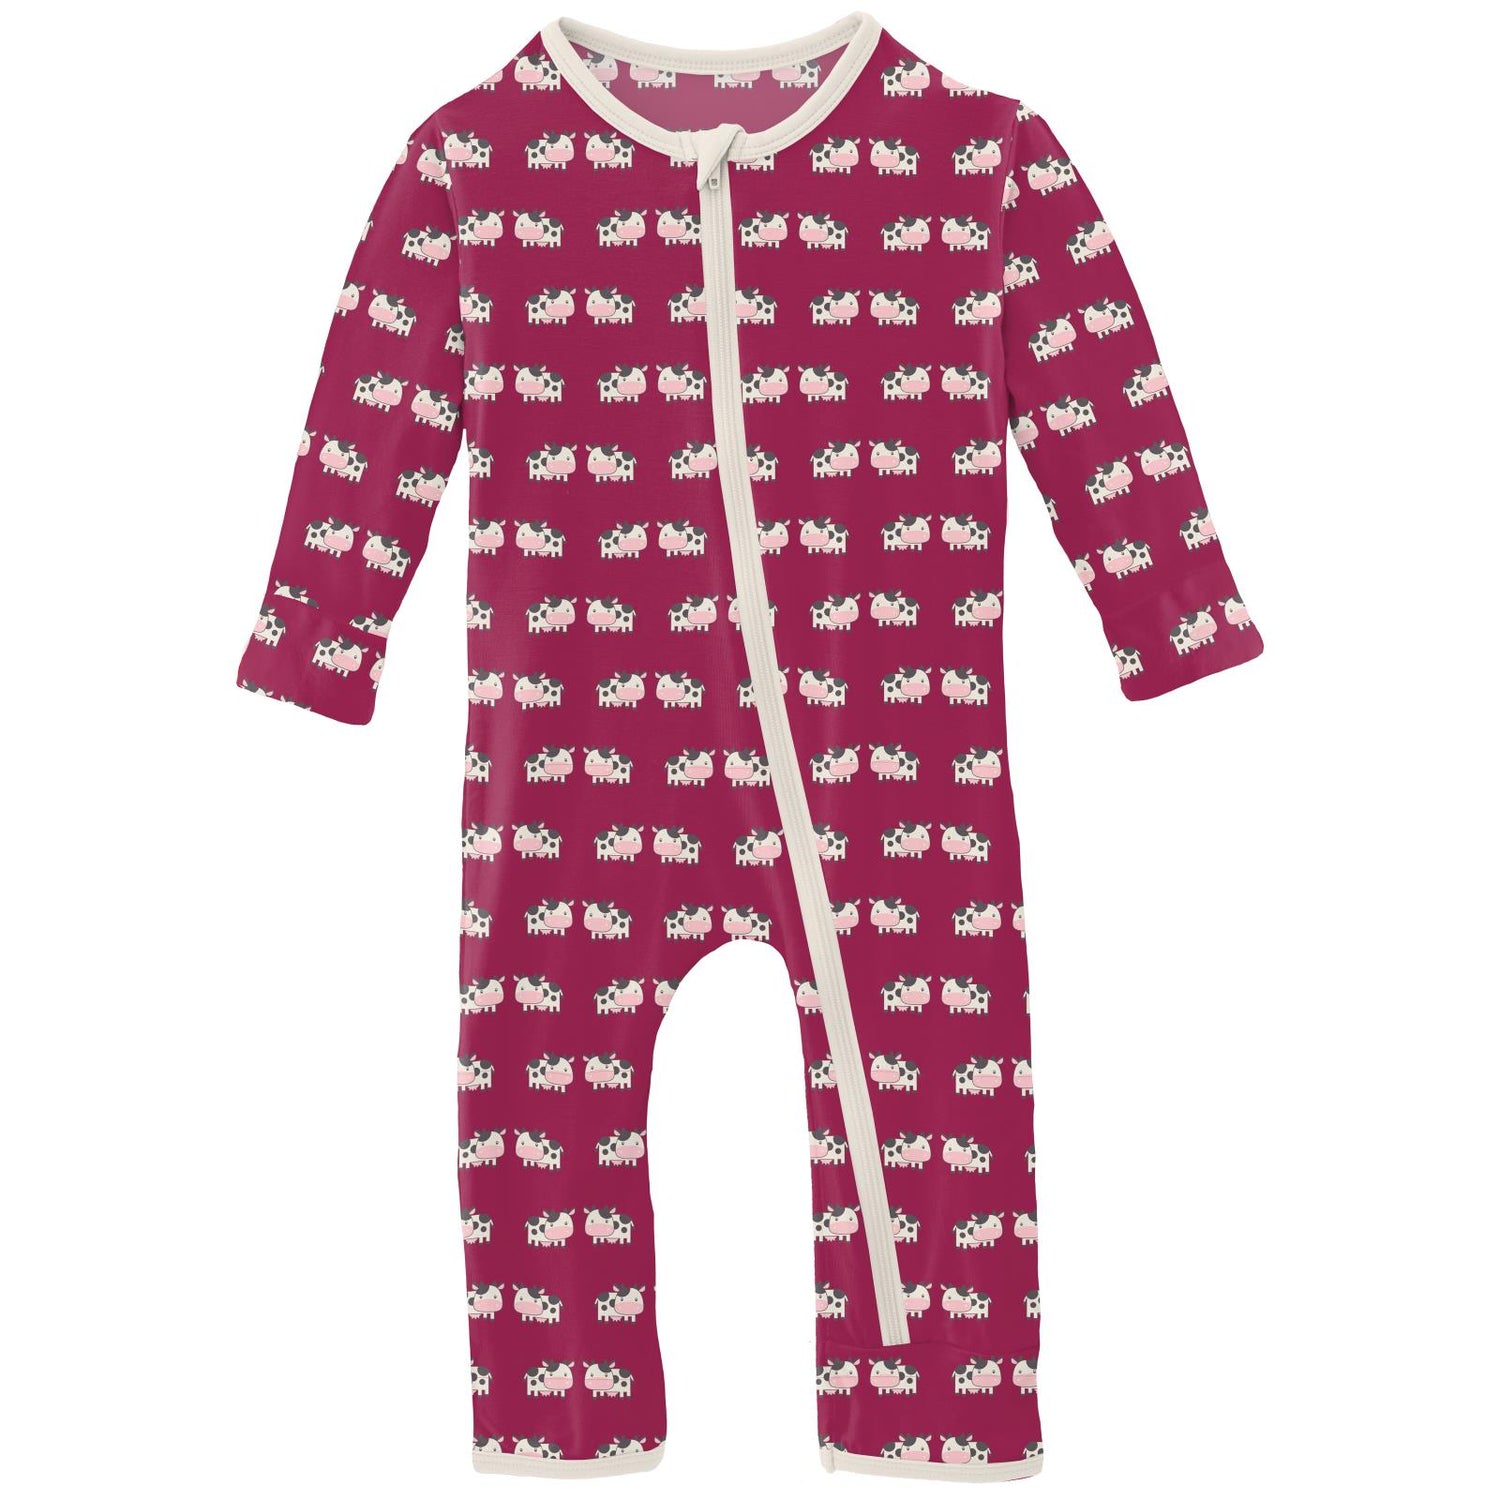 Print Coverall with Zipper in Berry Cow